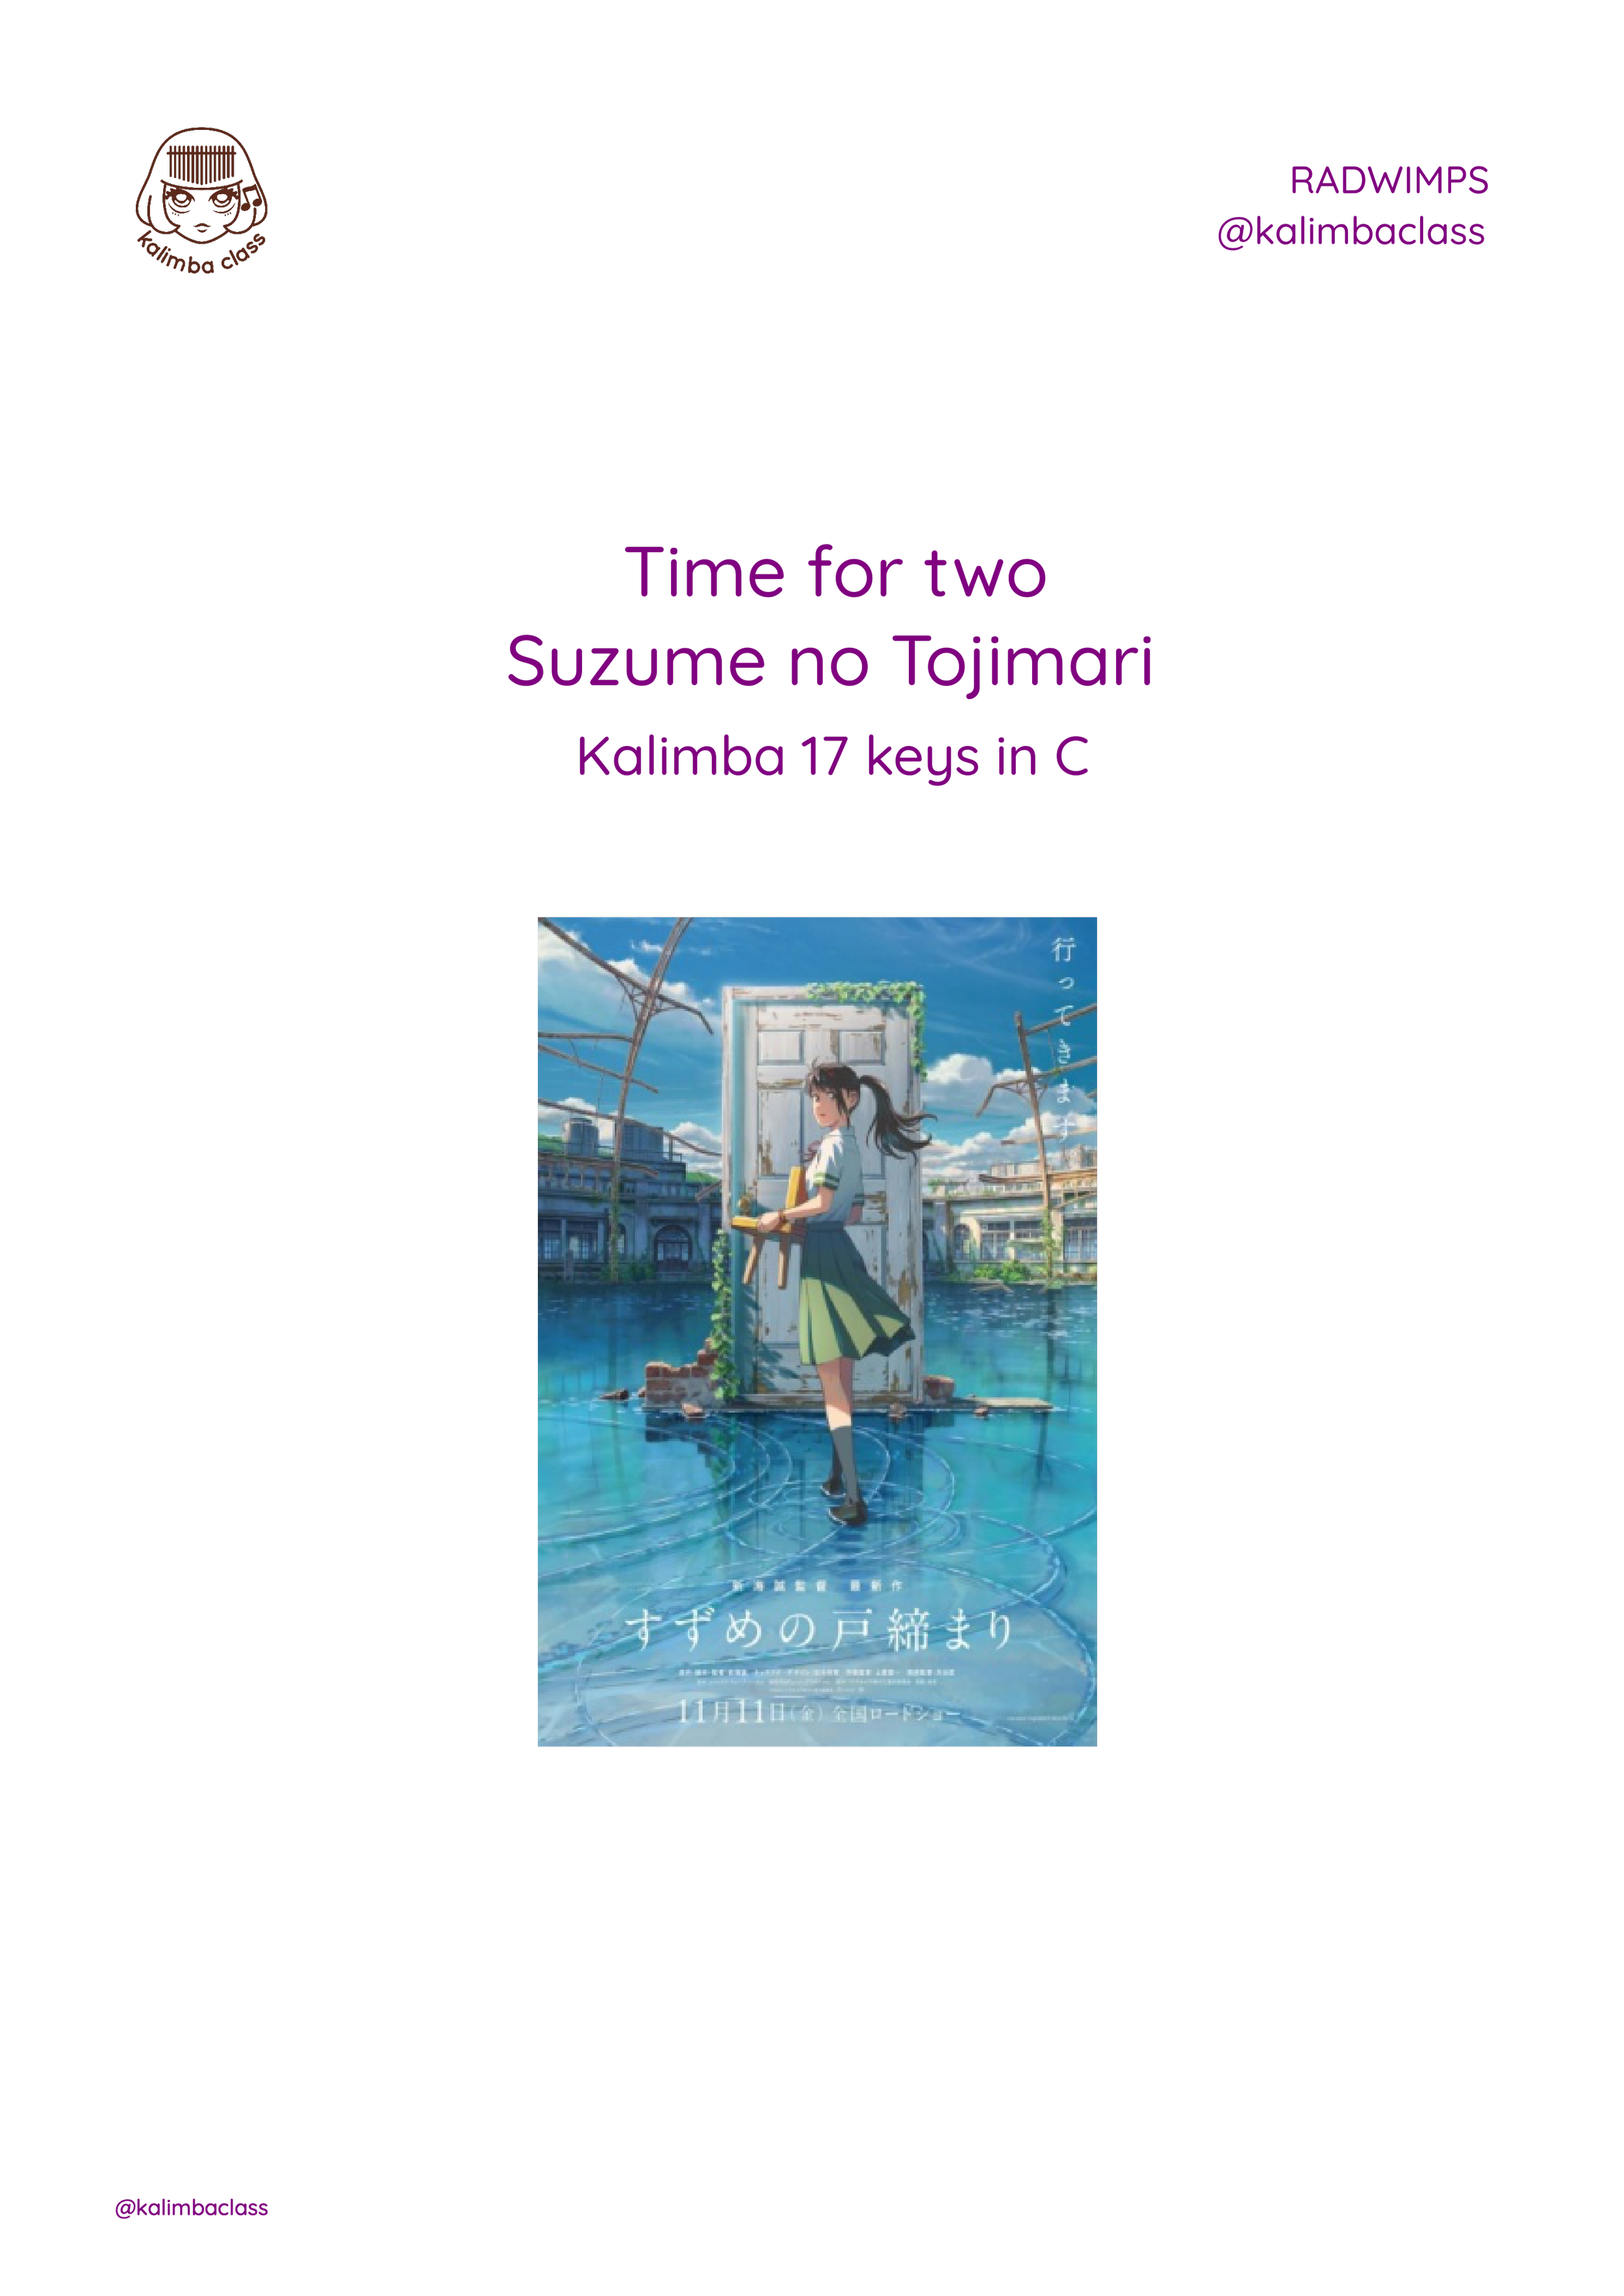 Time for two from Suzume no Tojimari  by R